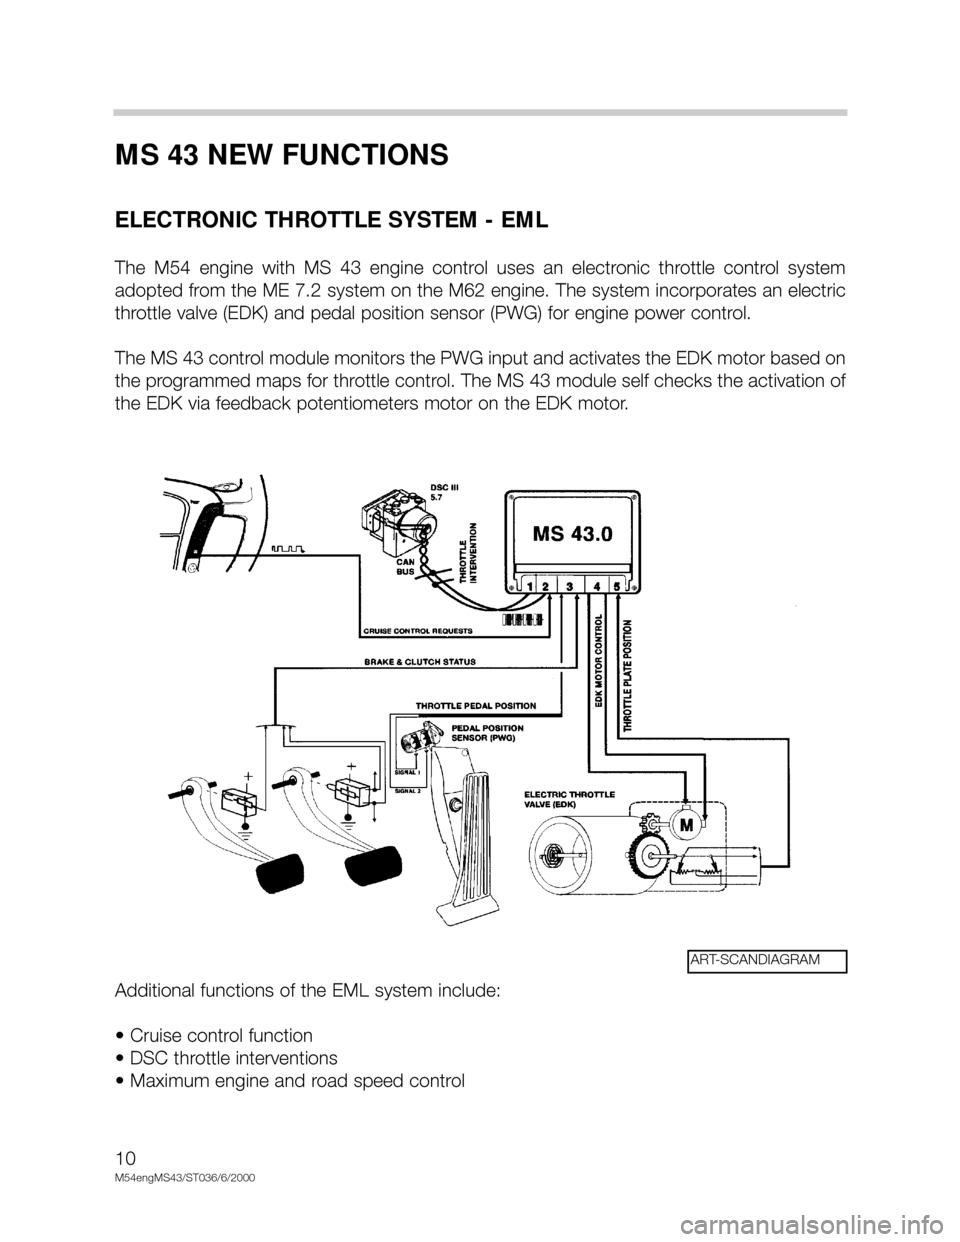 BMW X5 2004 E53 M54 Engine Workshop Manual 10
M54engMS43/ST036/6/2000
MS 43 NEW FUNCTIONS
ELECTRONIC THROTTLE SYSTEM - EML
The  M54  engine  with  MS  43  engine  control  uses  an  electronic  throttle  control  system
adopted from the ME 7.2